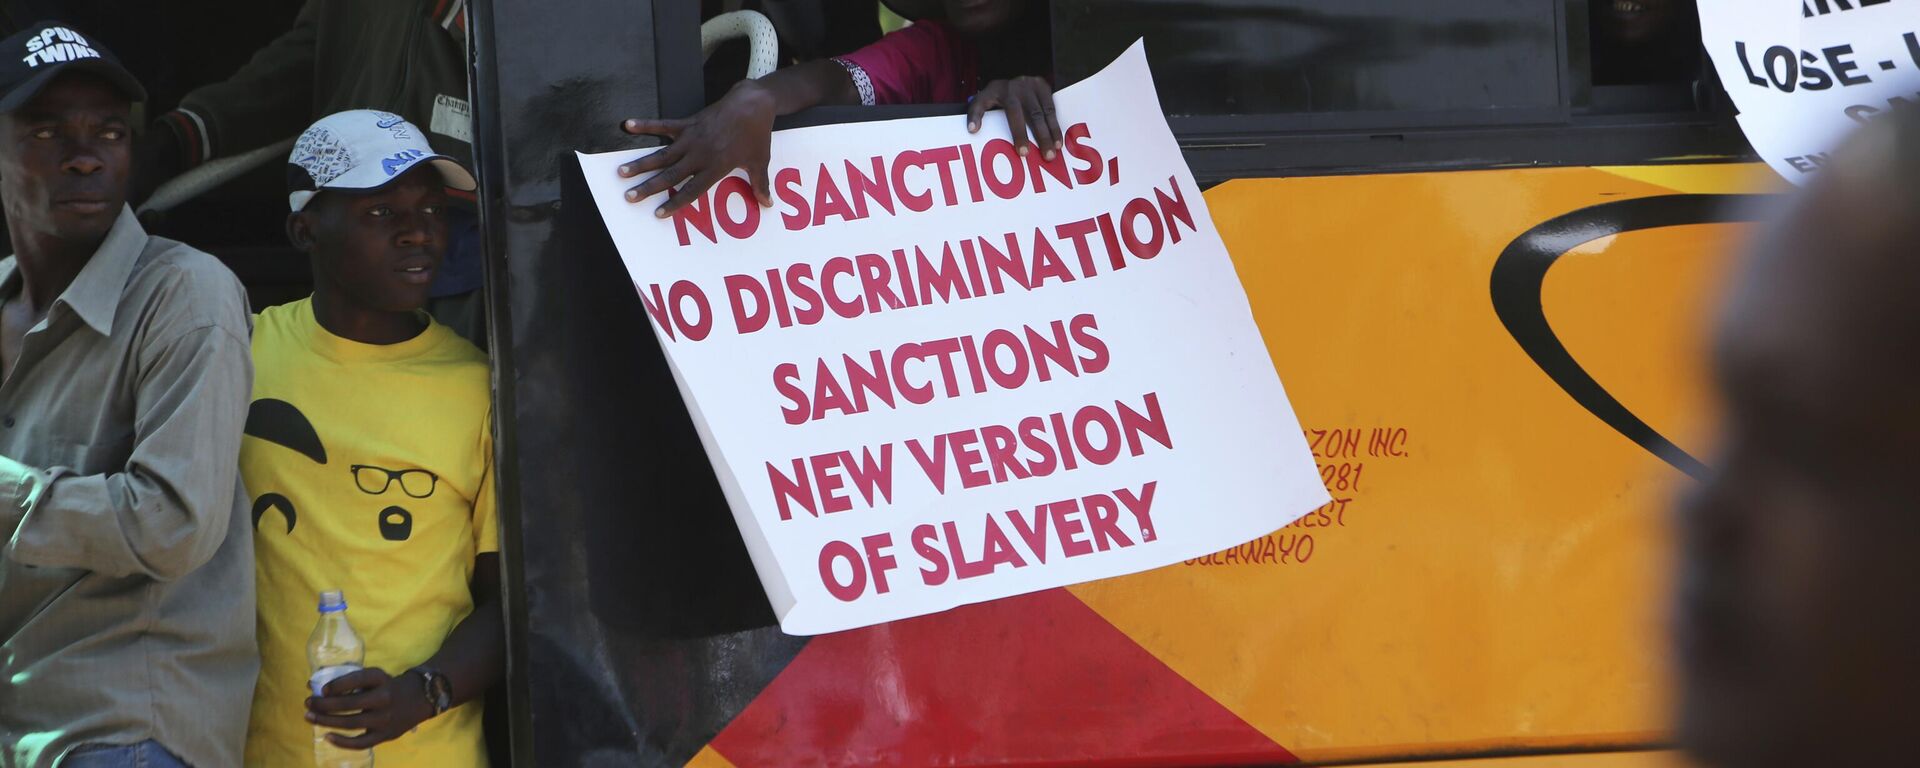 A woman on a bus holds a placard while protesting over U.S. sanctions that the Zimbabwean government blames for the country's worsening economic problems, in Harare, Friday, Oct, 25, 2019. The Zimbabwe government blames U.S. sanctions for devastating economic conditions, galloping inflation and severe shortages of basic goods, but the U.S. blames corruption, financial mismanagement and human rights violations instead - Sputnik Africa, 1920, 31.05.2023